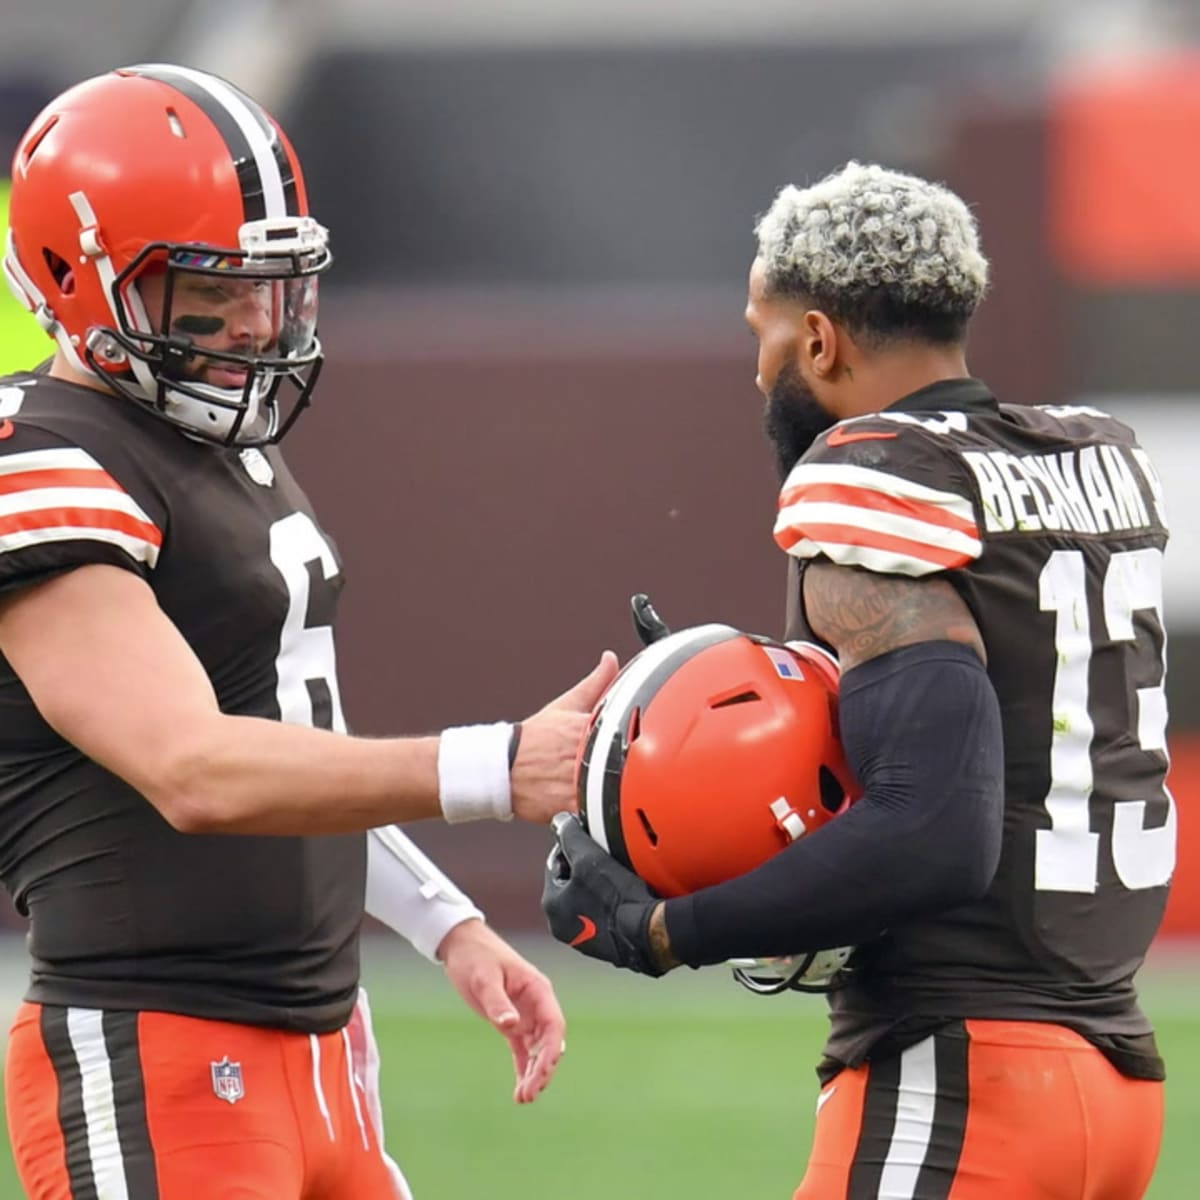 Browns: Clay Matthews Jr. and others to wear 57 in Cleveland